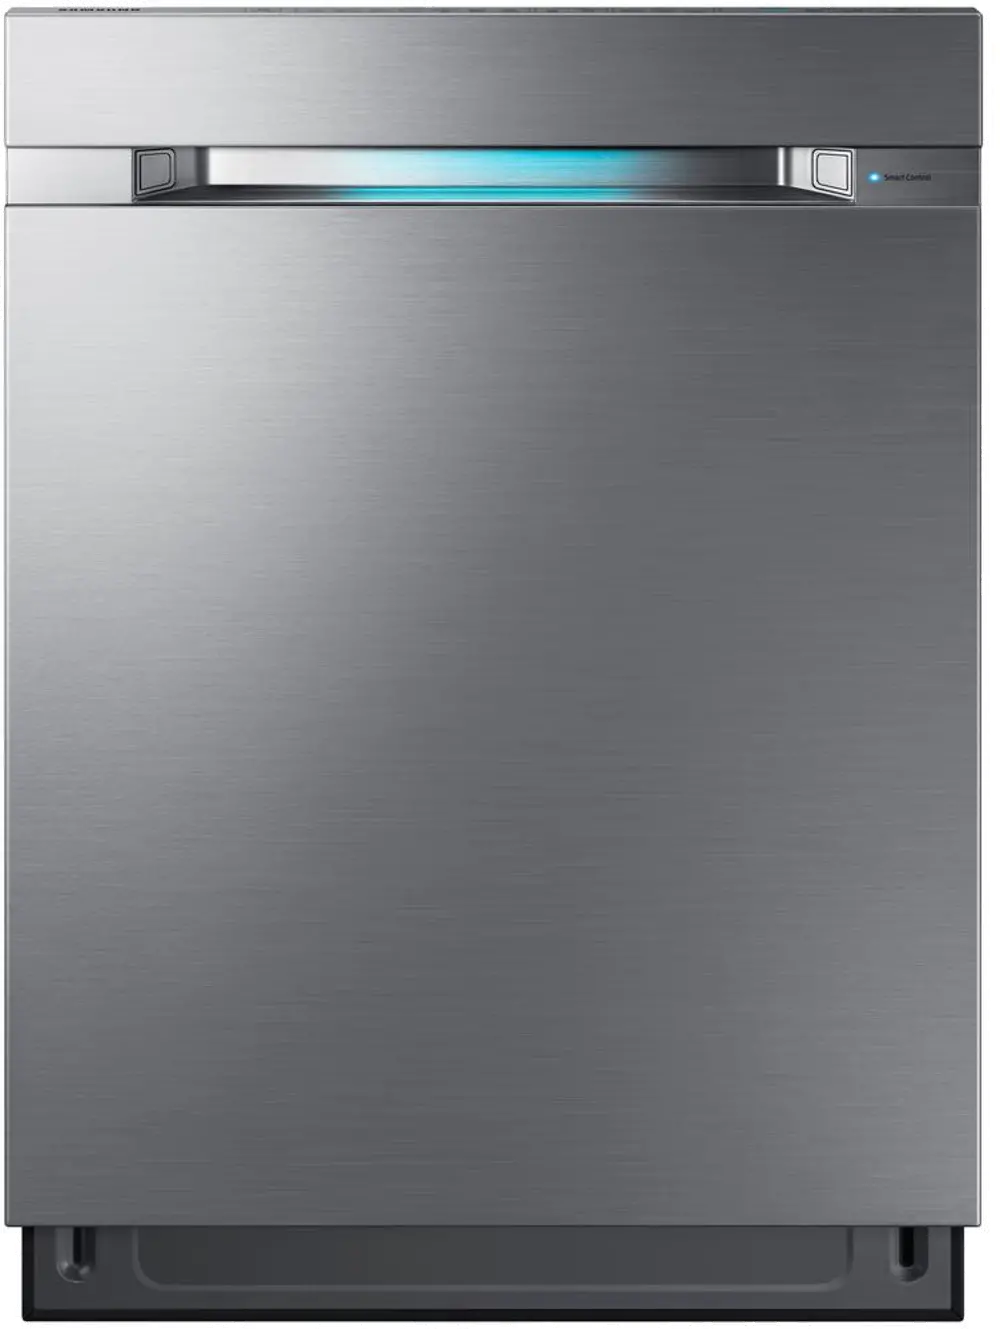 DW80M9960US Samsung Dishwasher with Stainless Steel Tub - Stainless Steel-1